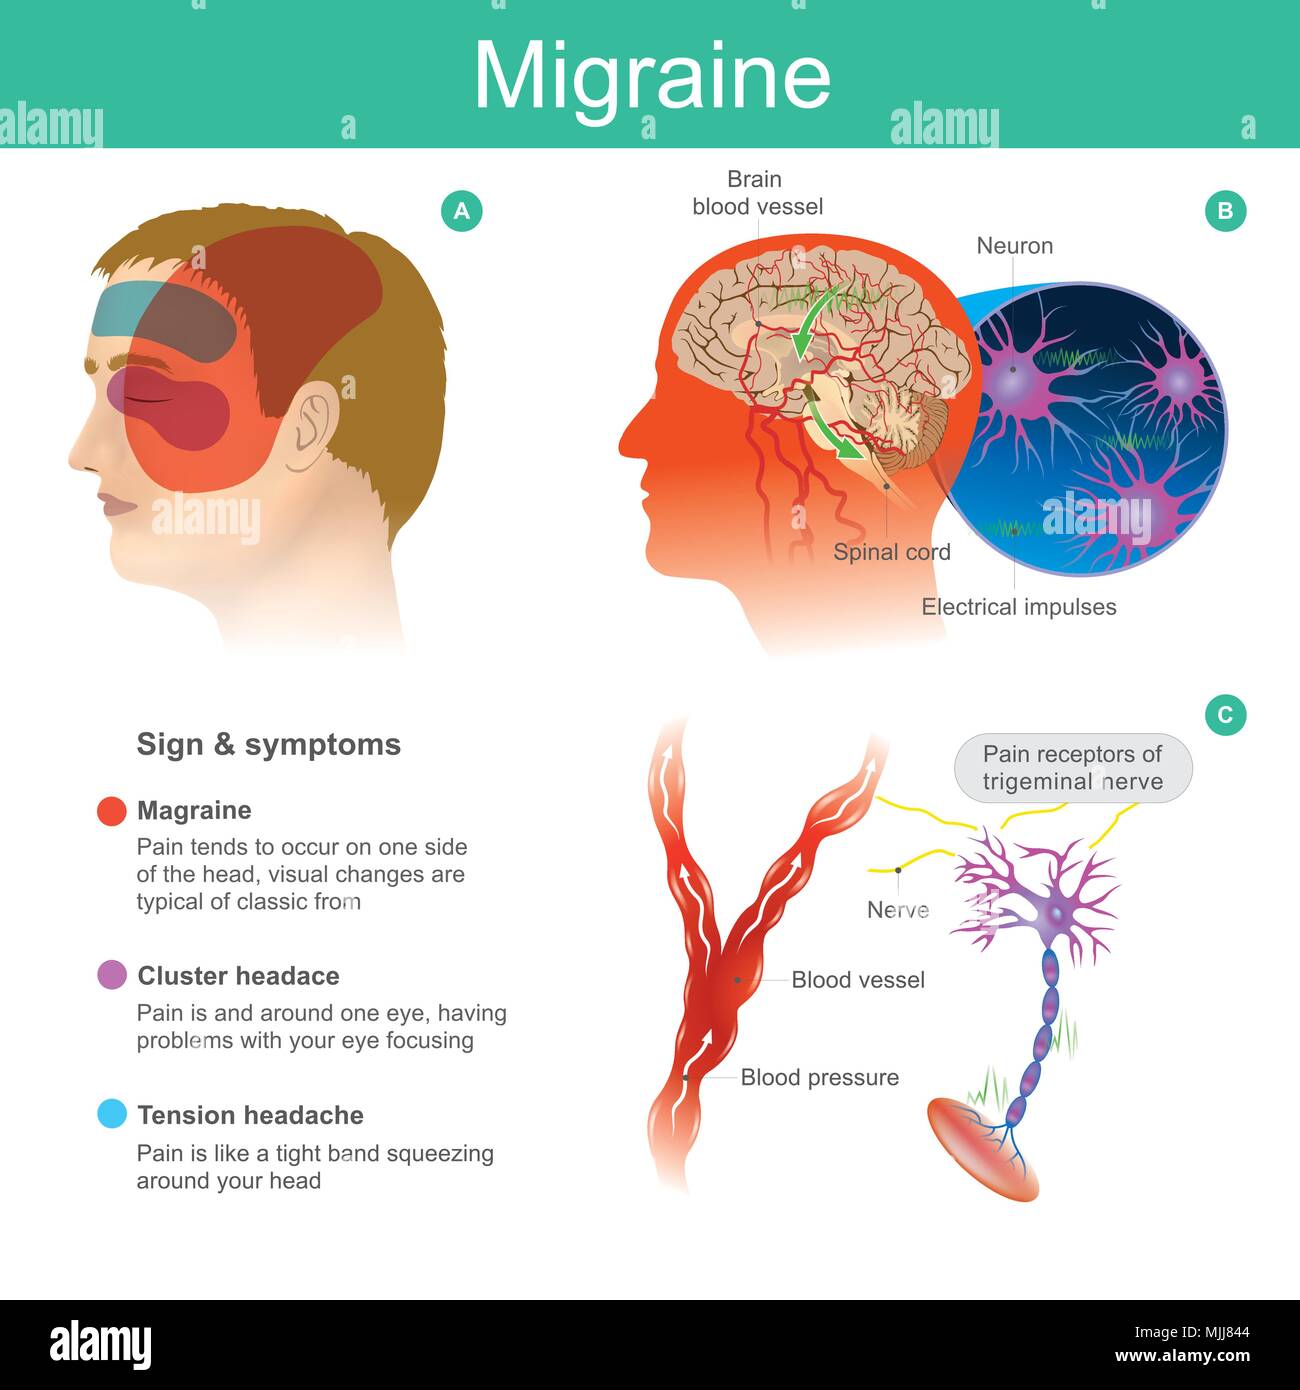 Migraine. Headache, pain, tend cooccur on one side of the head Pressured blood vessels reduce blood flow for brain. Illustration. Stock Vector